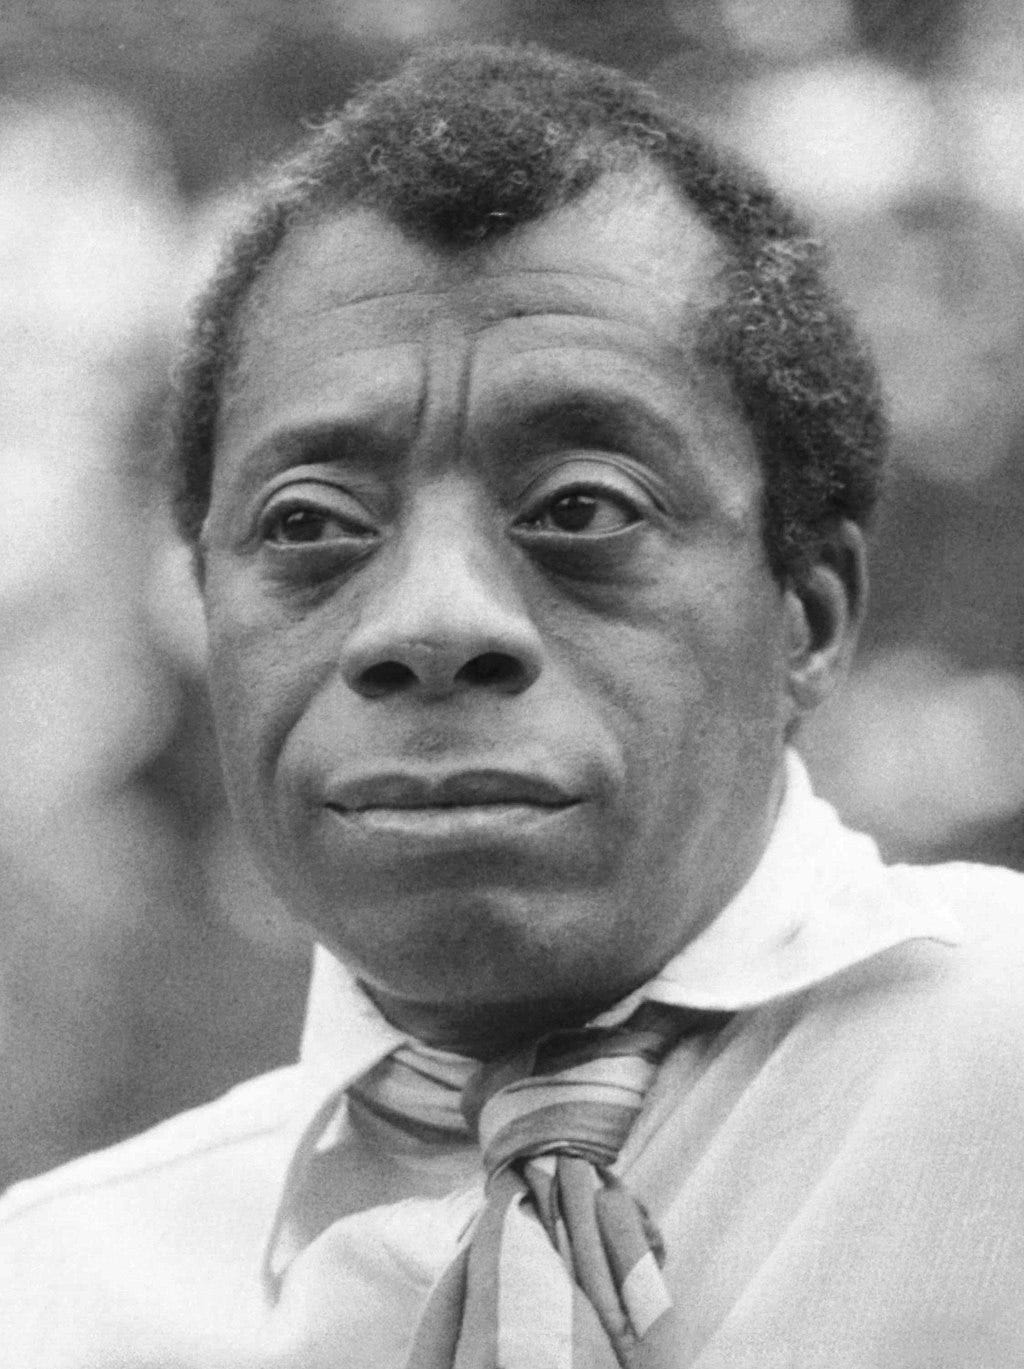 James Baldwin's Writing Truth. On being a writer